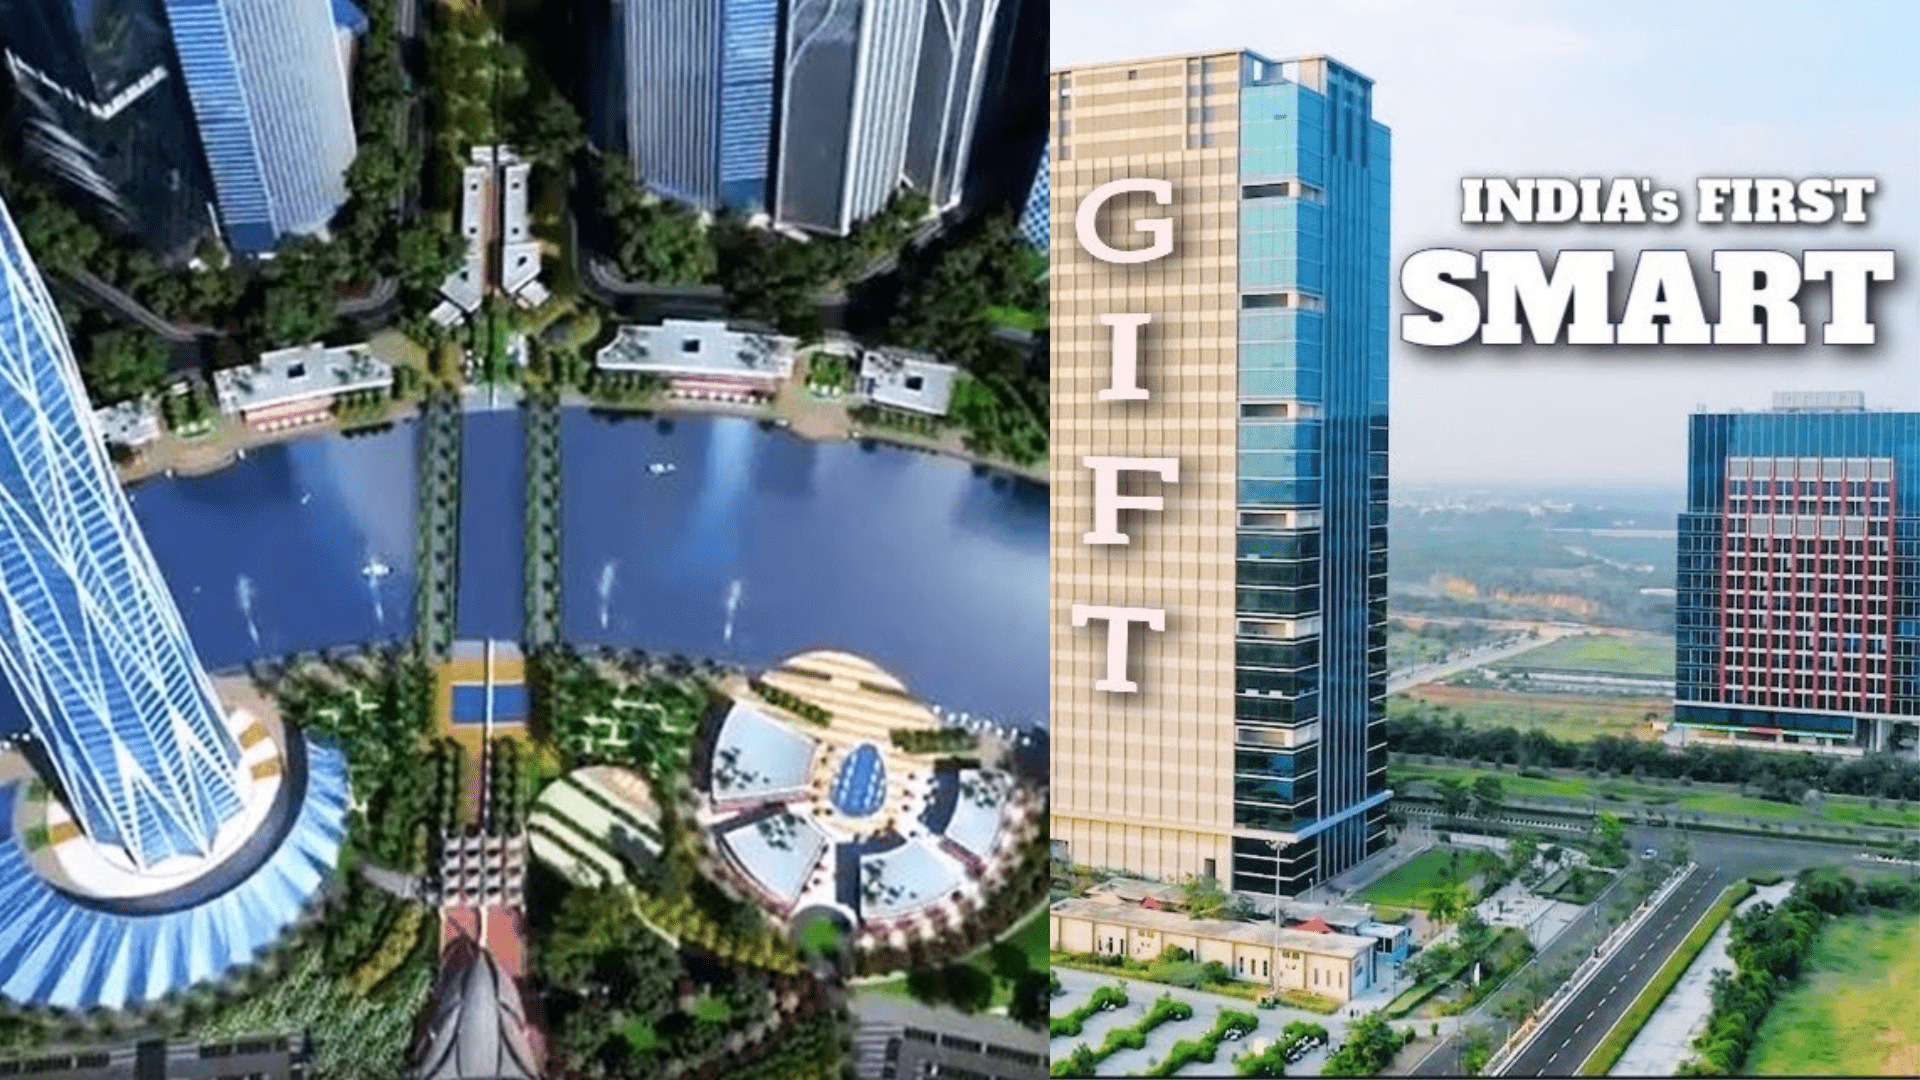 What is Gift City in Gujarat